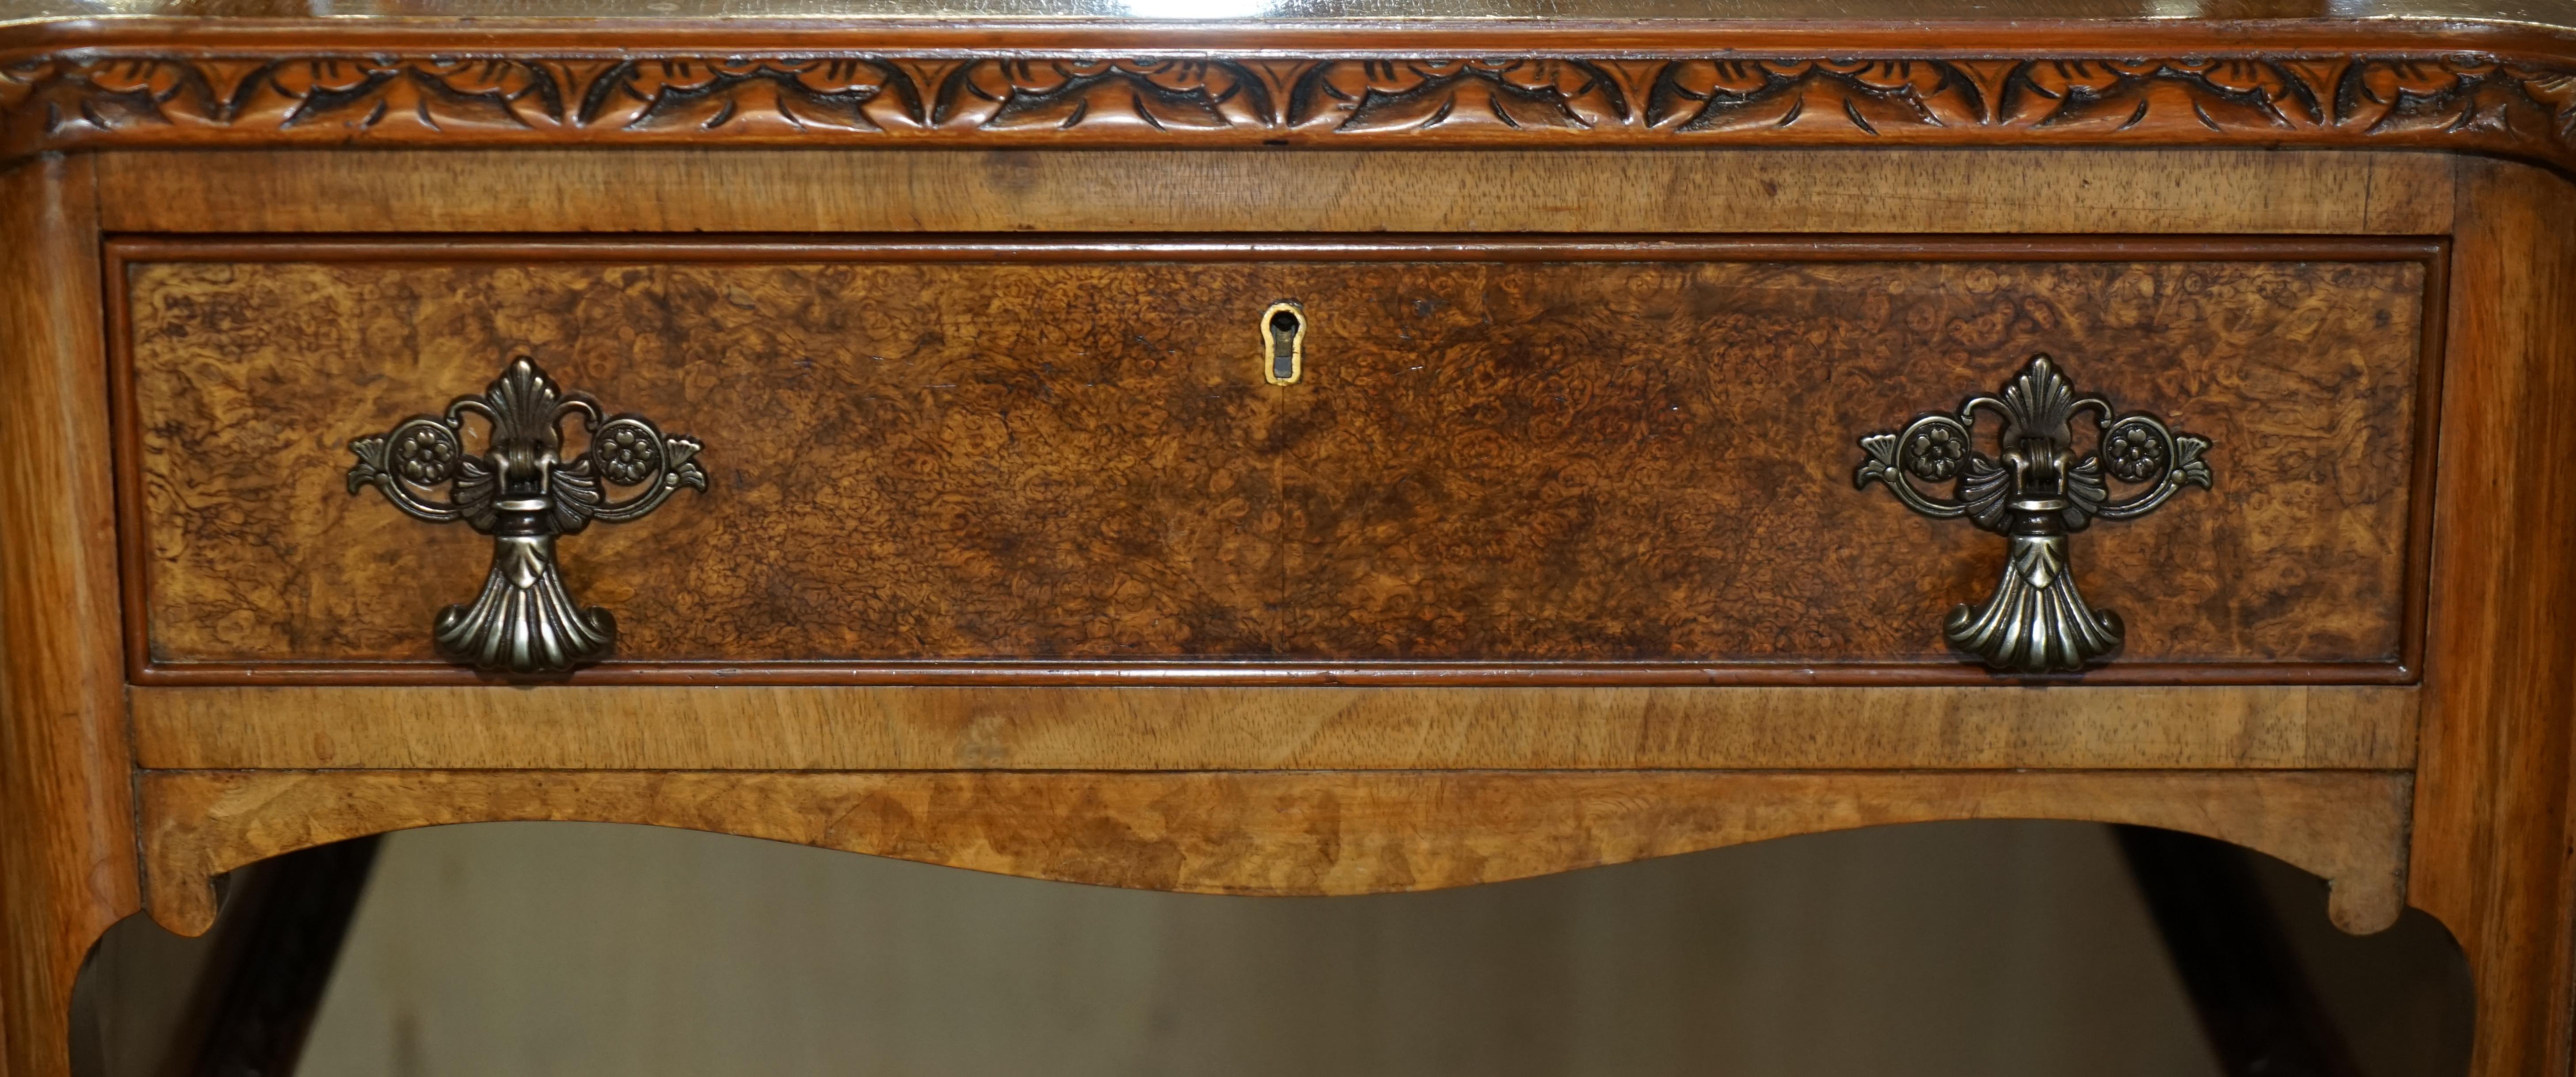 SUBLIME MAPLE & CO BURR WALNUT HAND CARVED DRESSING TABLE PART OF SUiTE im Angebot 2